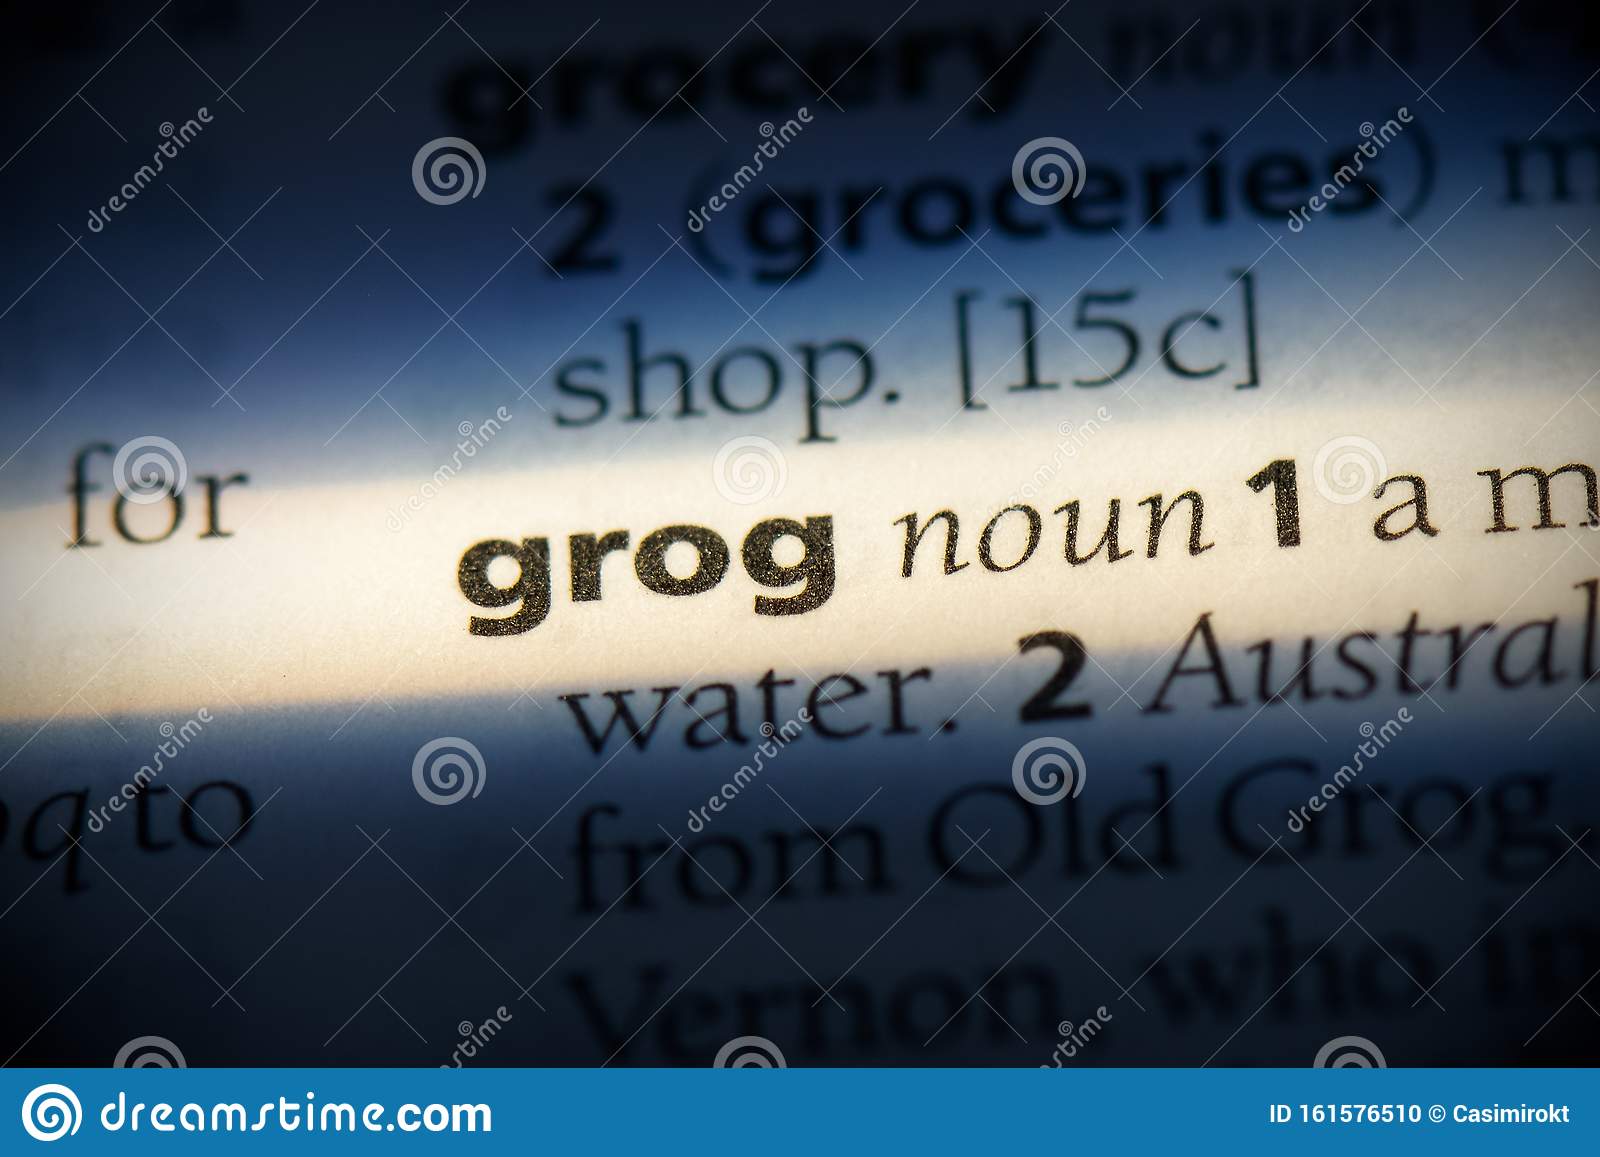 what does grog mean and where does the word grog come from